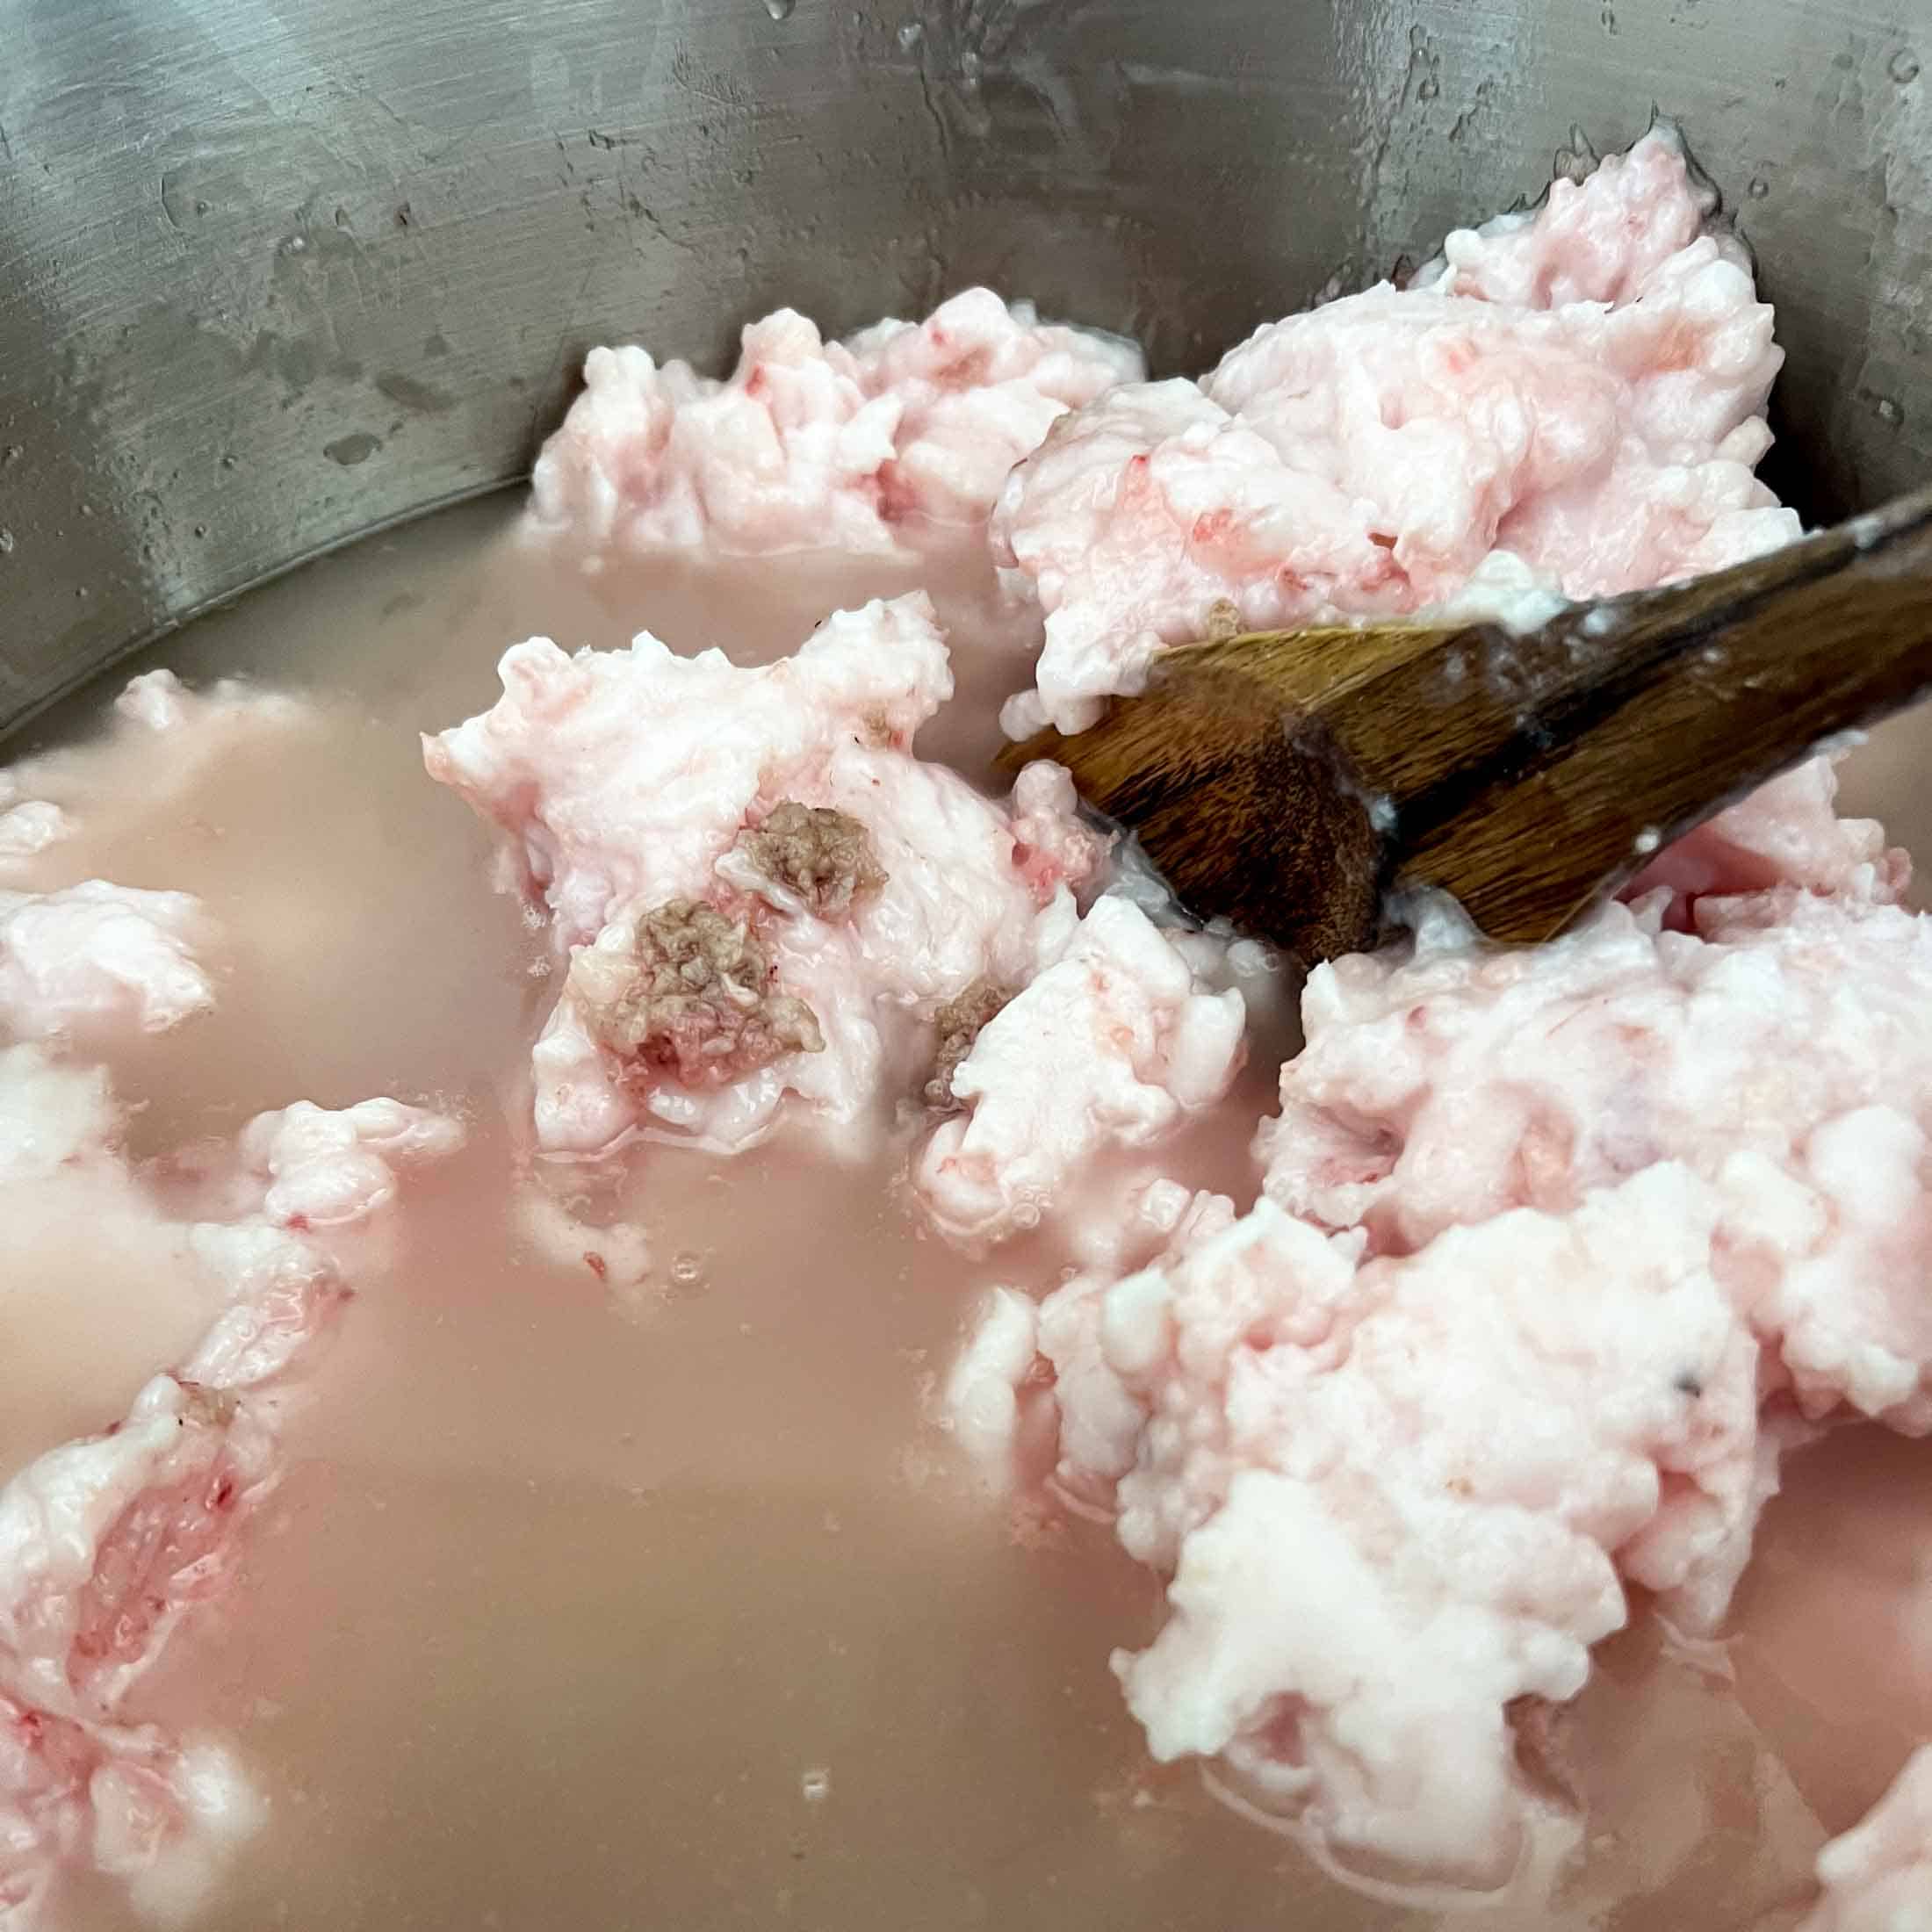 A large amount of lard in a big stock pot with both solid fat and melted fat being incorporated.